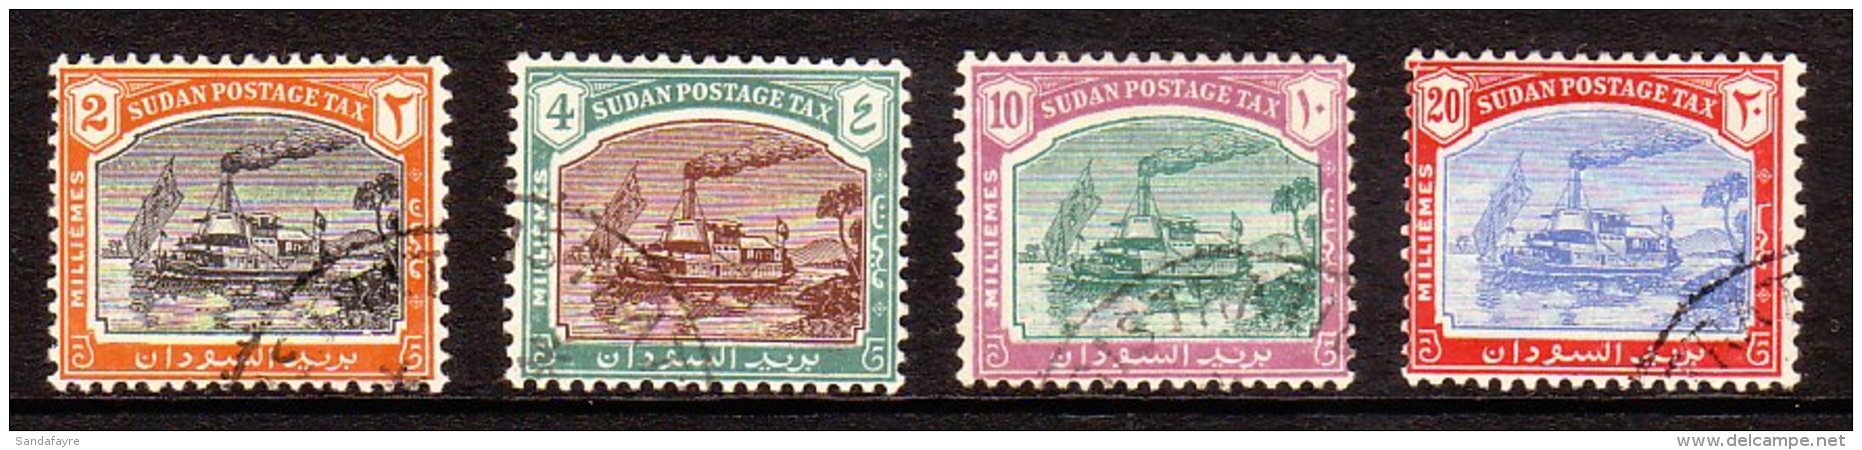 POSTAGE DUES 1948 Complete Set, SG D12/15, Very Fine Cds Used, Fresh Colours! (4 Stamps) For More Images, Please... - Sudan (...-1951)